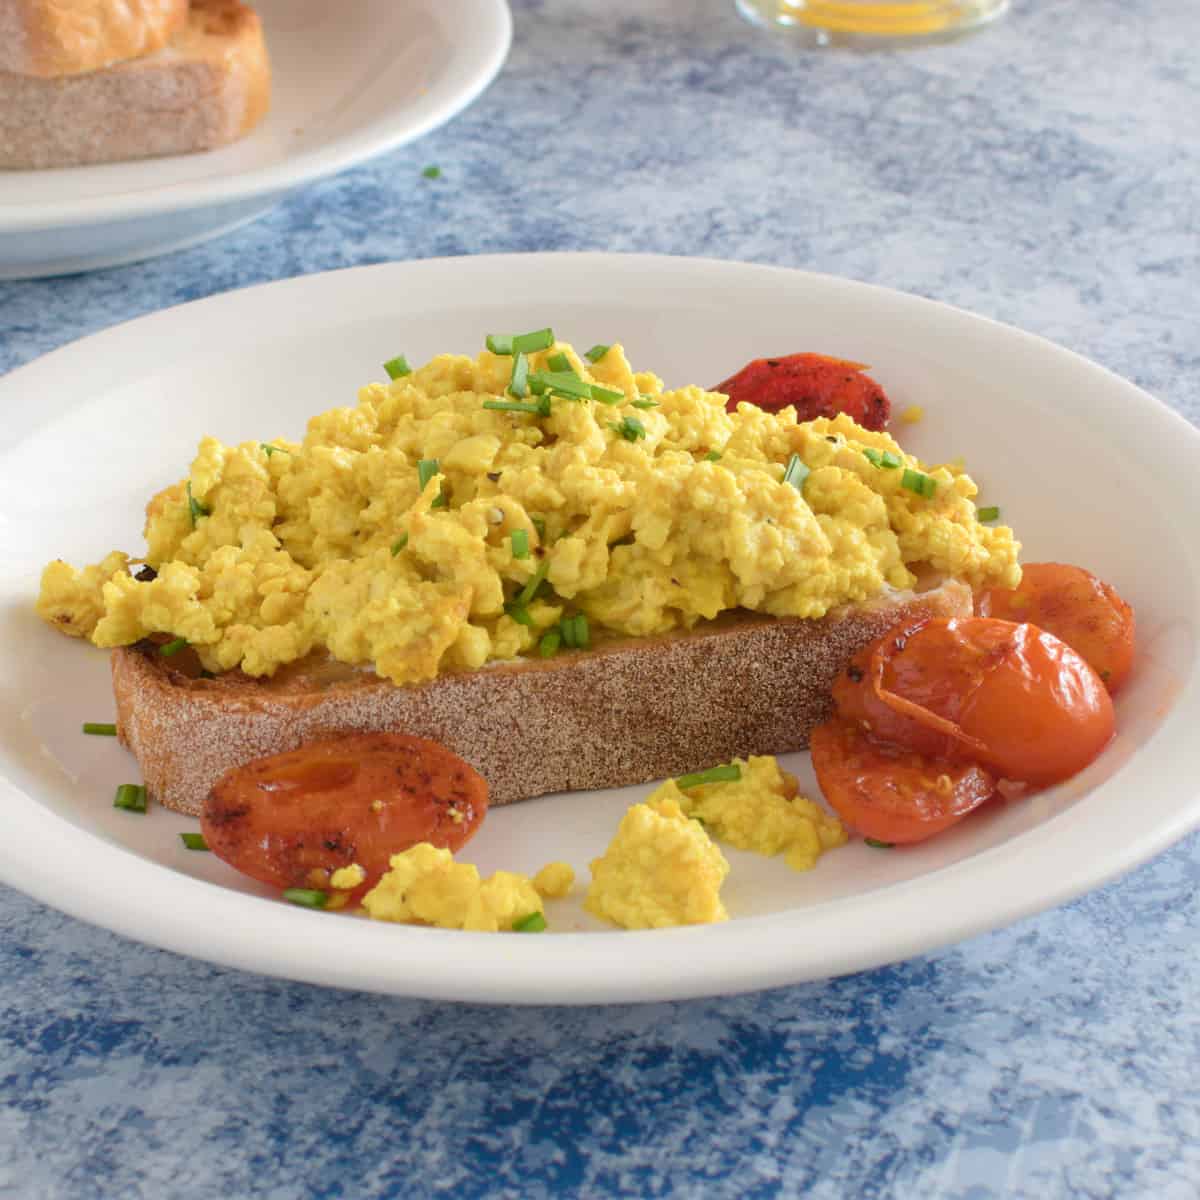 A breakfast plate of toast with scrambled silken tofu and pan fried tomatoes.